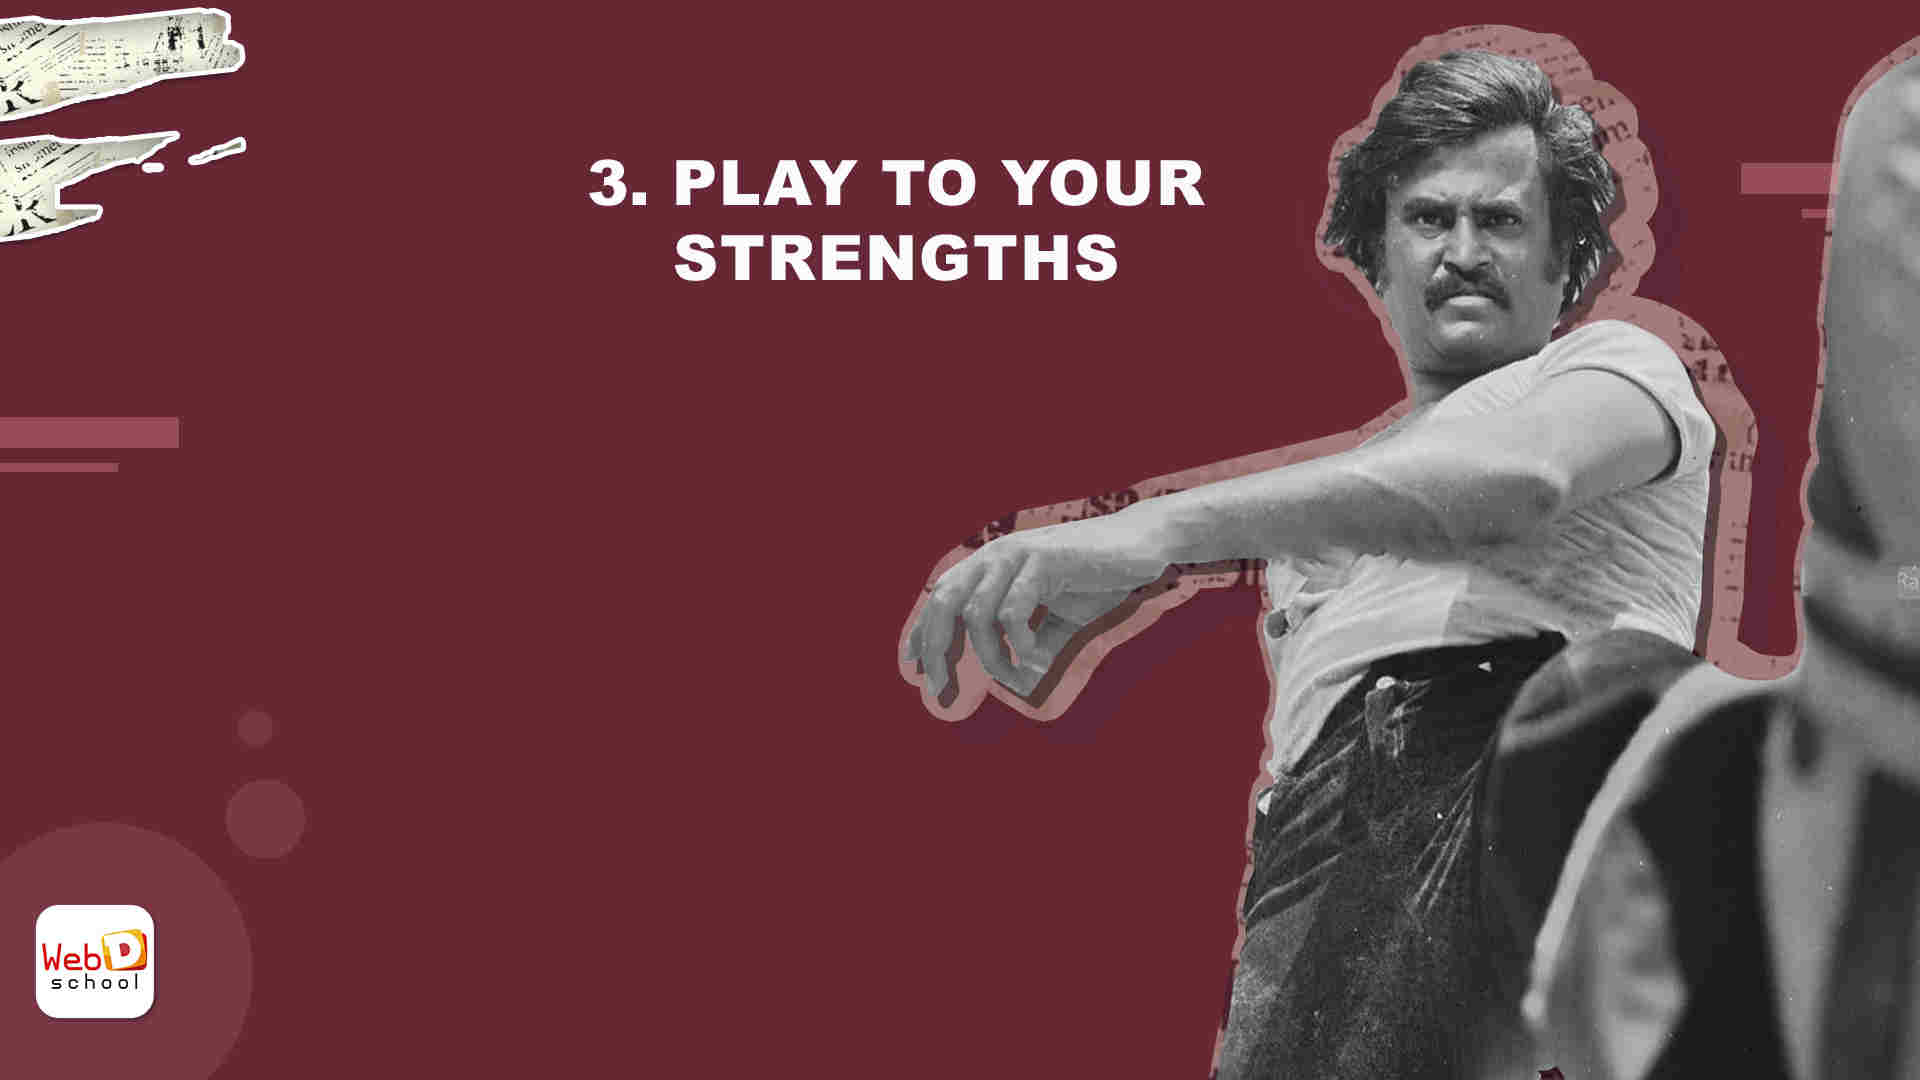 Play to your strengths